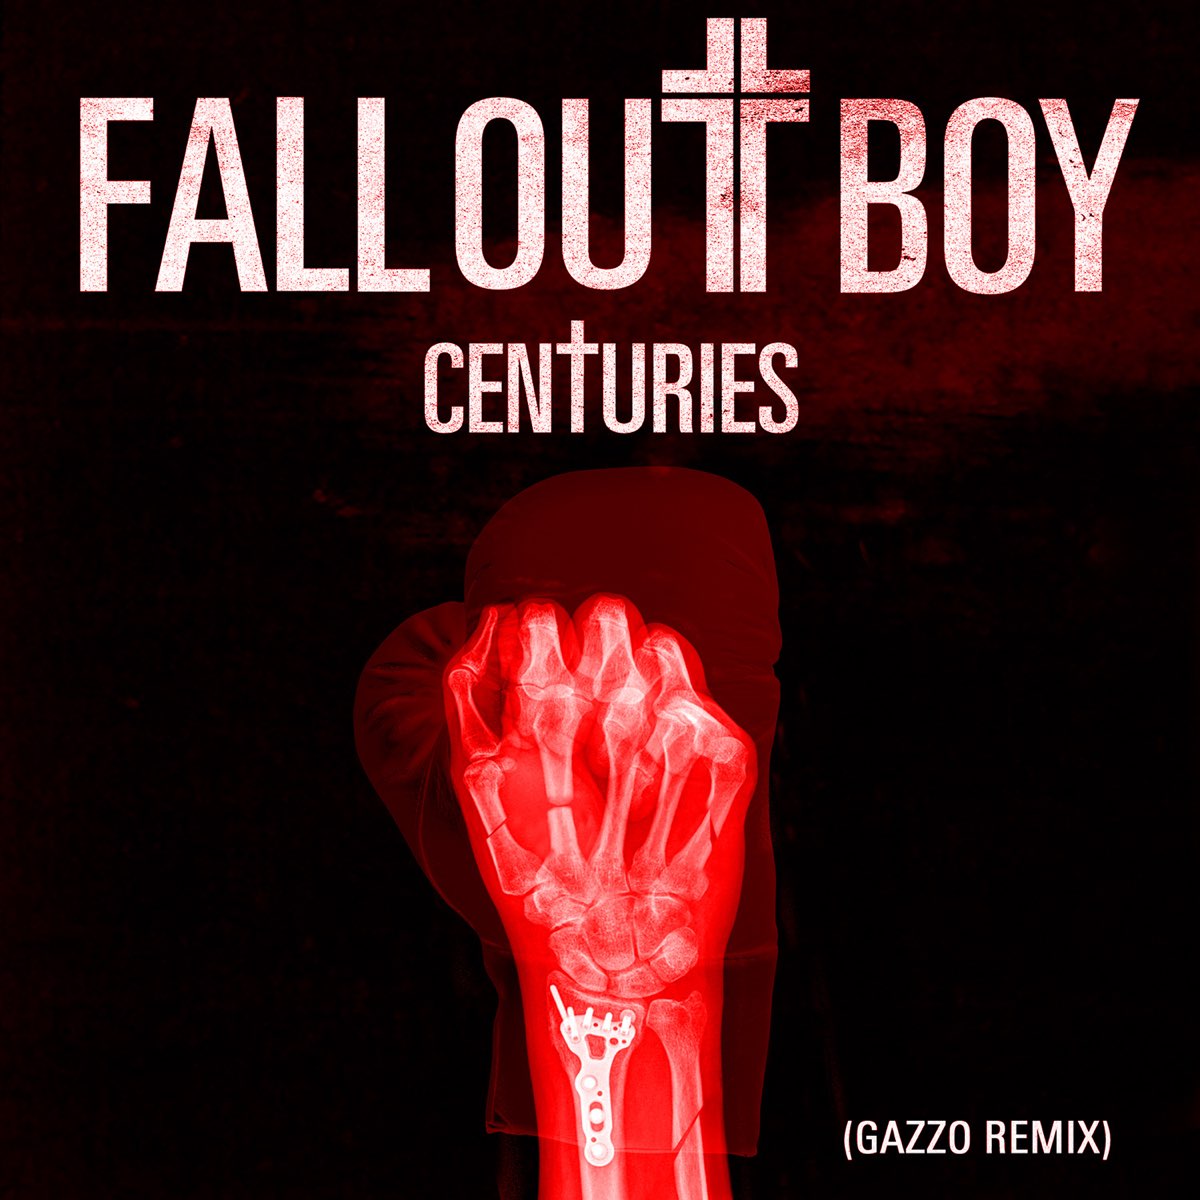 Centuries fall out. Сентери Фолл аут бойс. Fallout boy Centuries. Fall out boy обложки альбомов. Fall out boy Centuries.